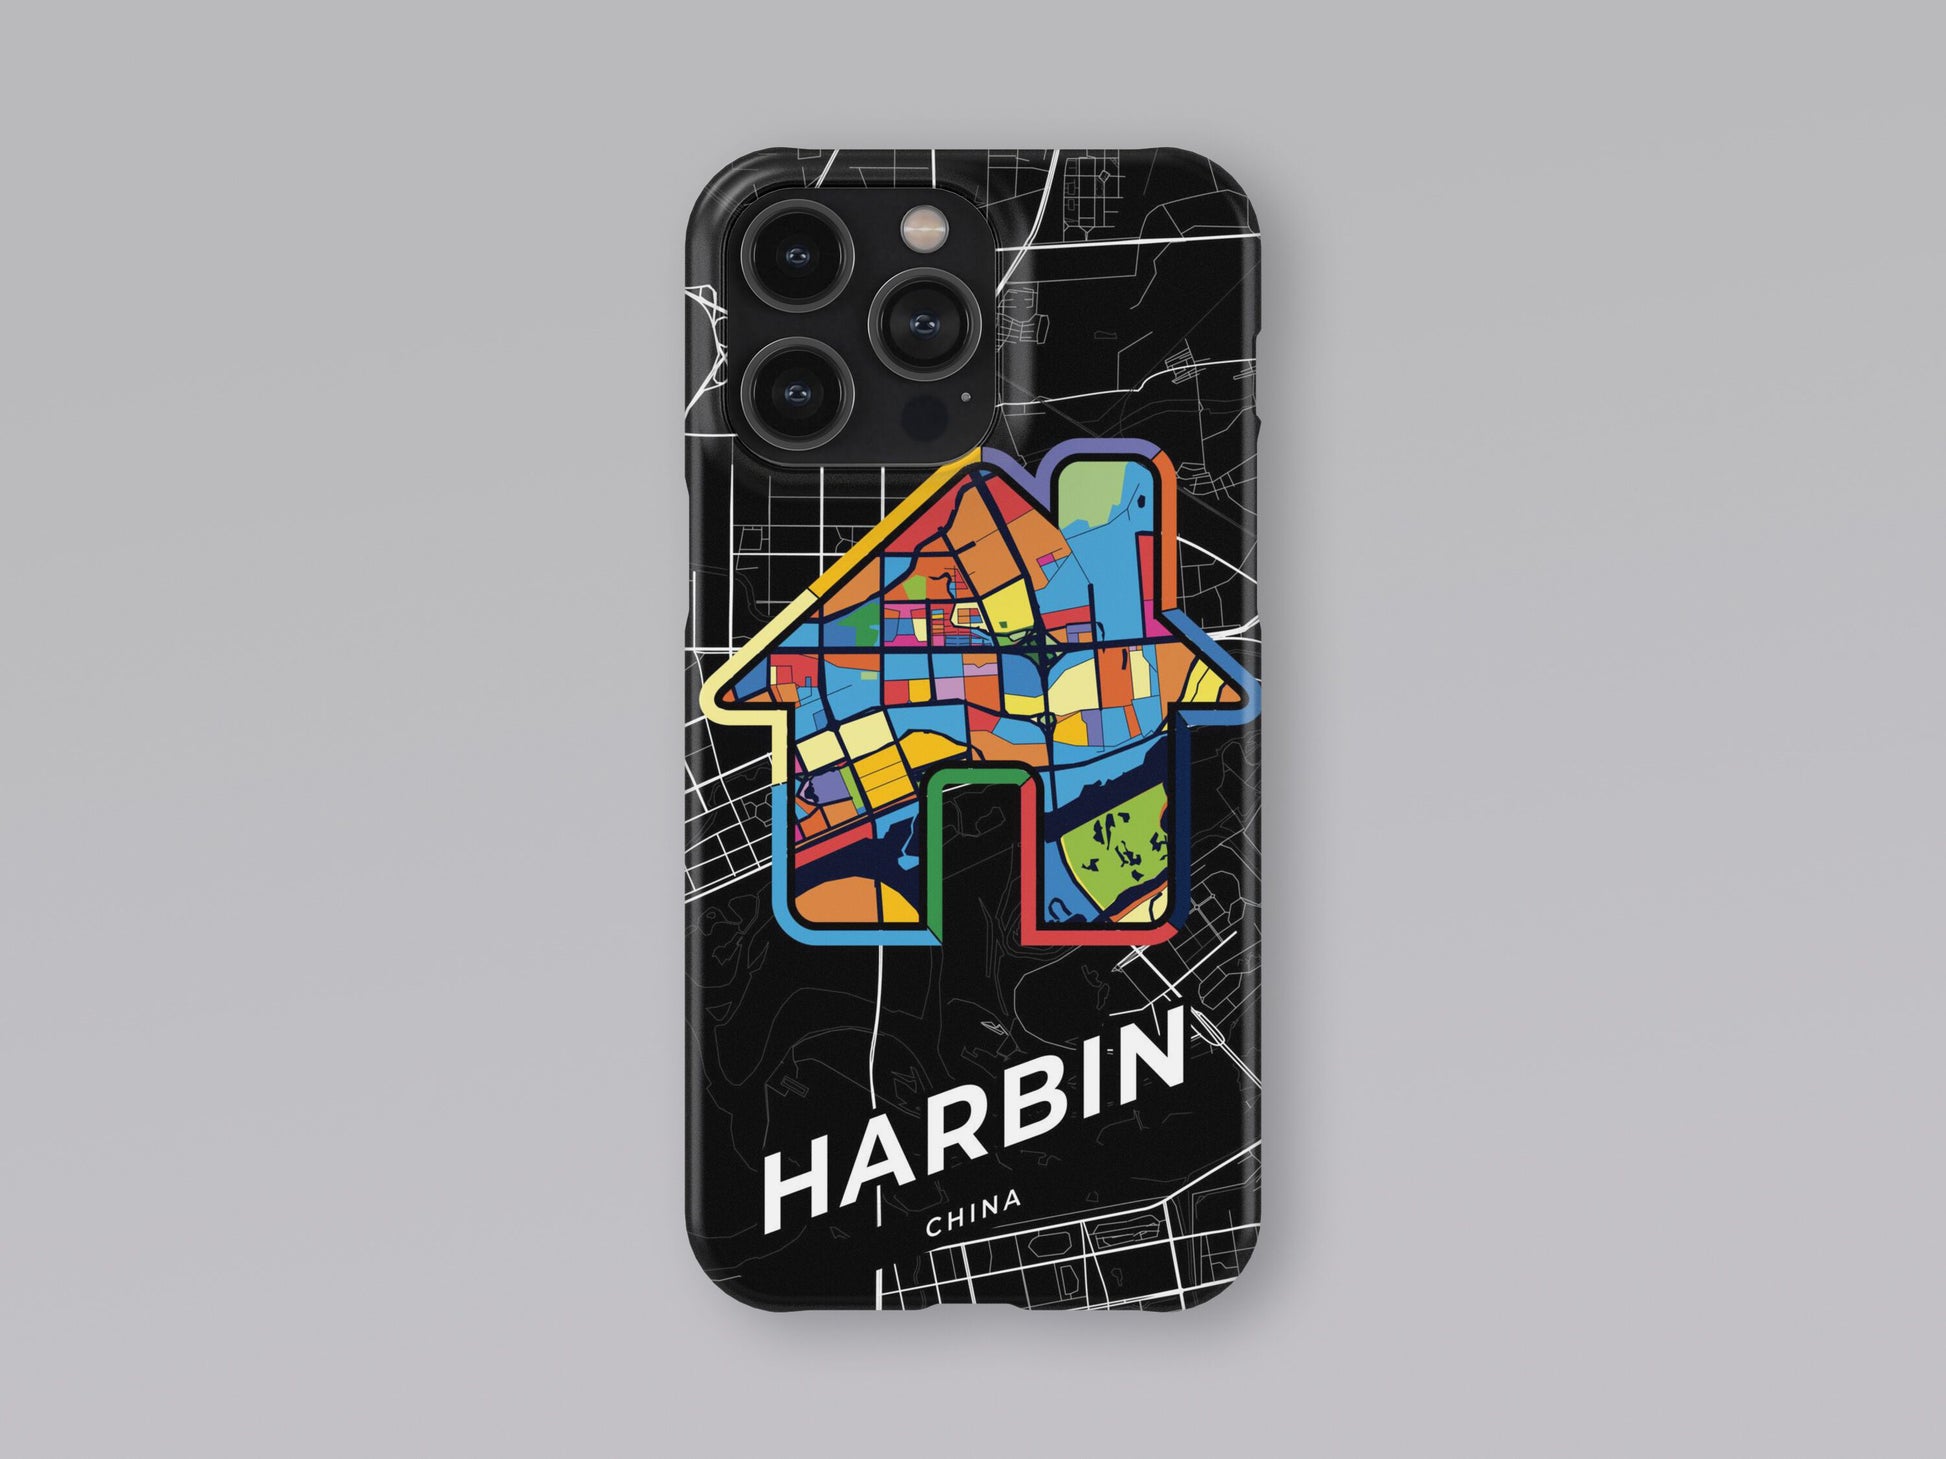 Harbin China slim phone case with colorful icon. Birthday, wedding or housewarming gift. Couple match cases. 3